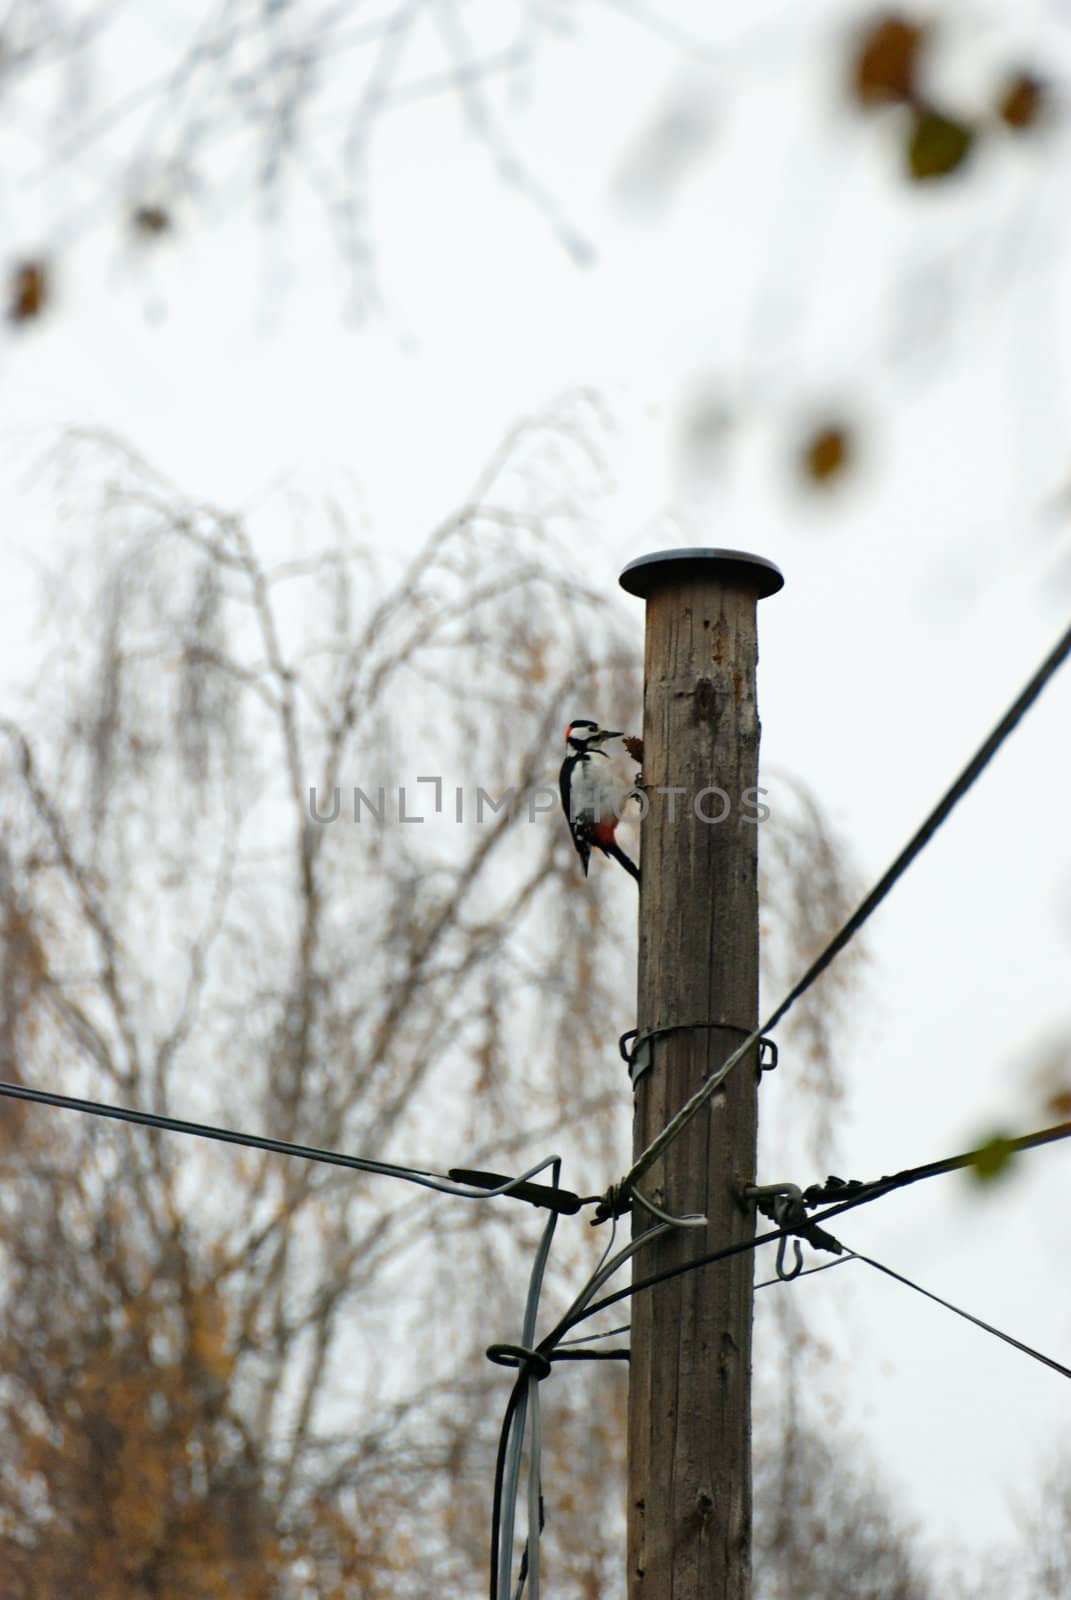 A woodpecker, feeding on telephone pole one early cloudy morning.
